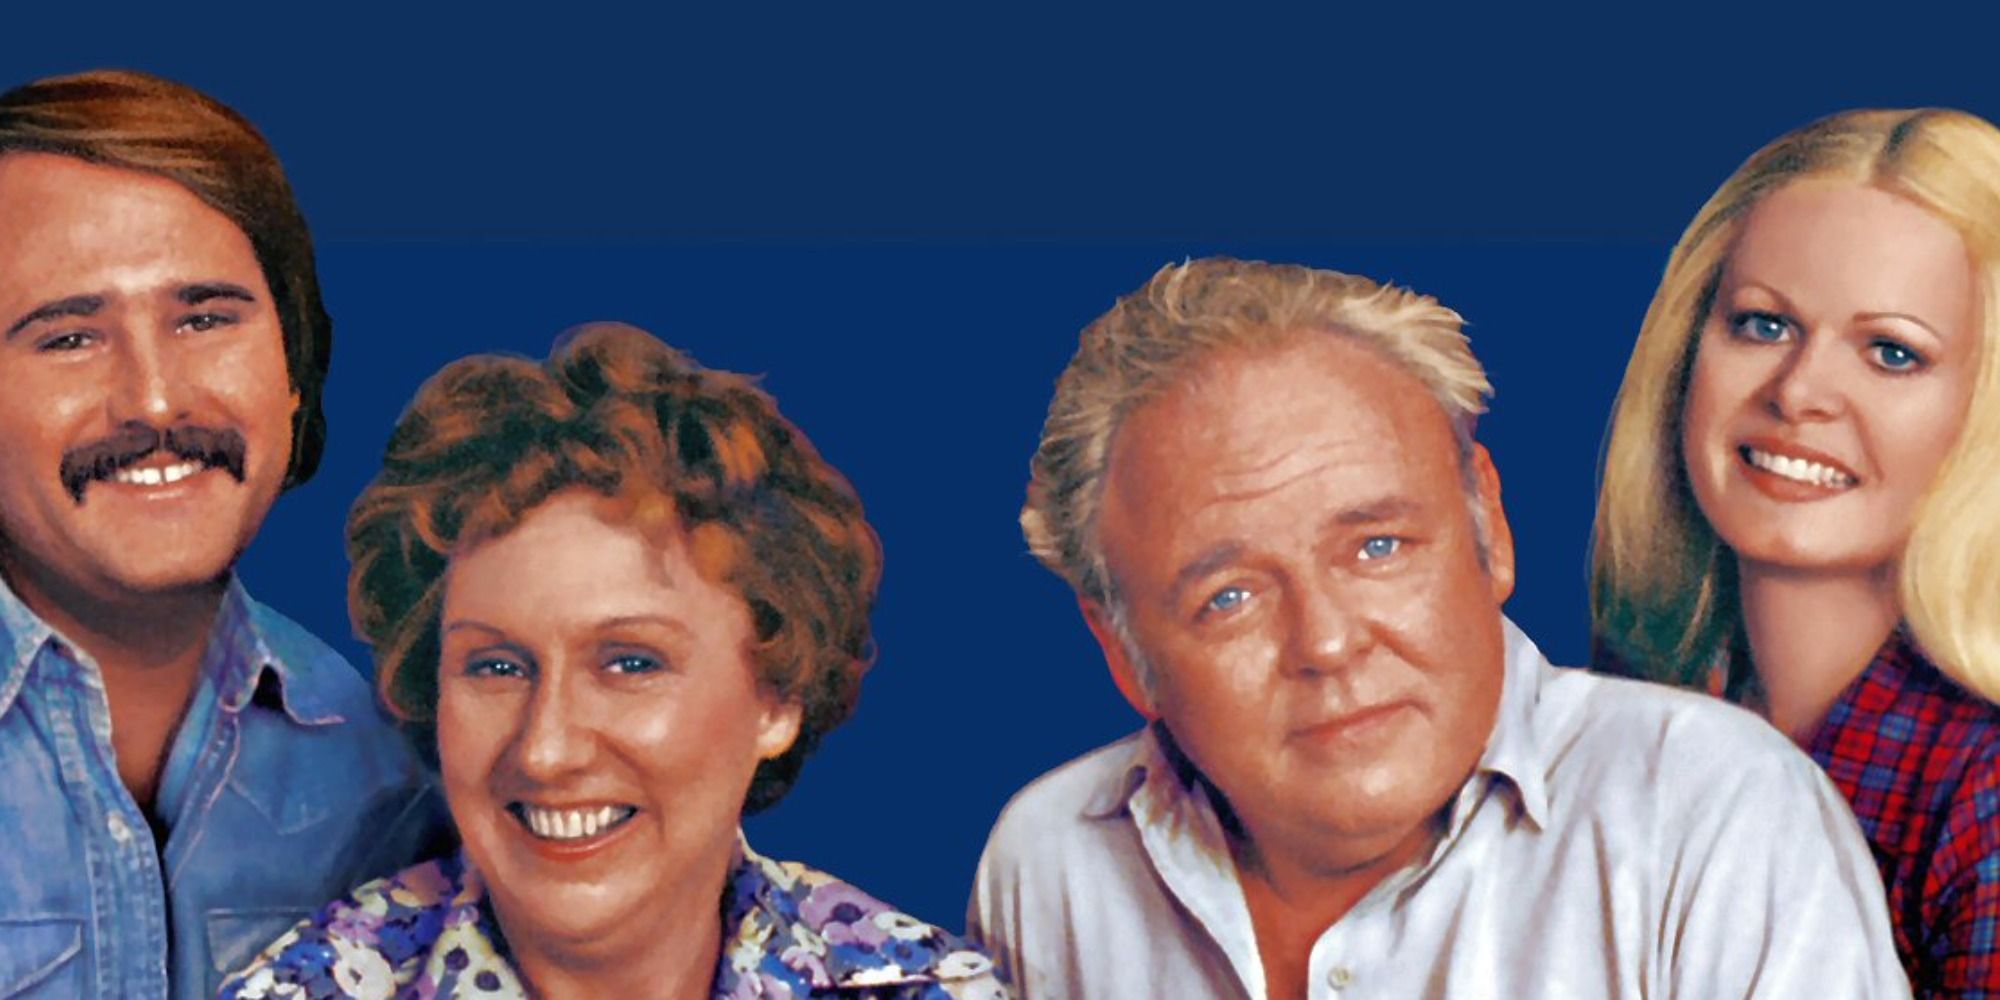 Mike, Edith, Archie, and Gloria posed together against a blue background for All In The Family